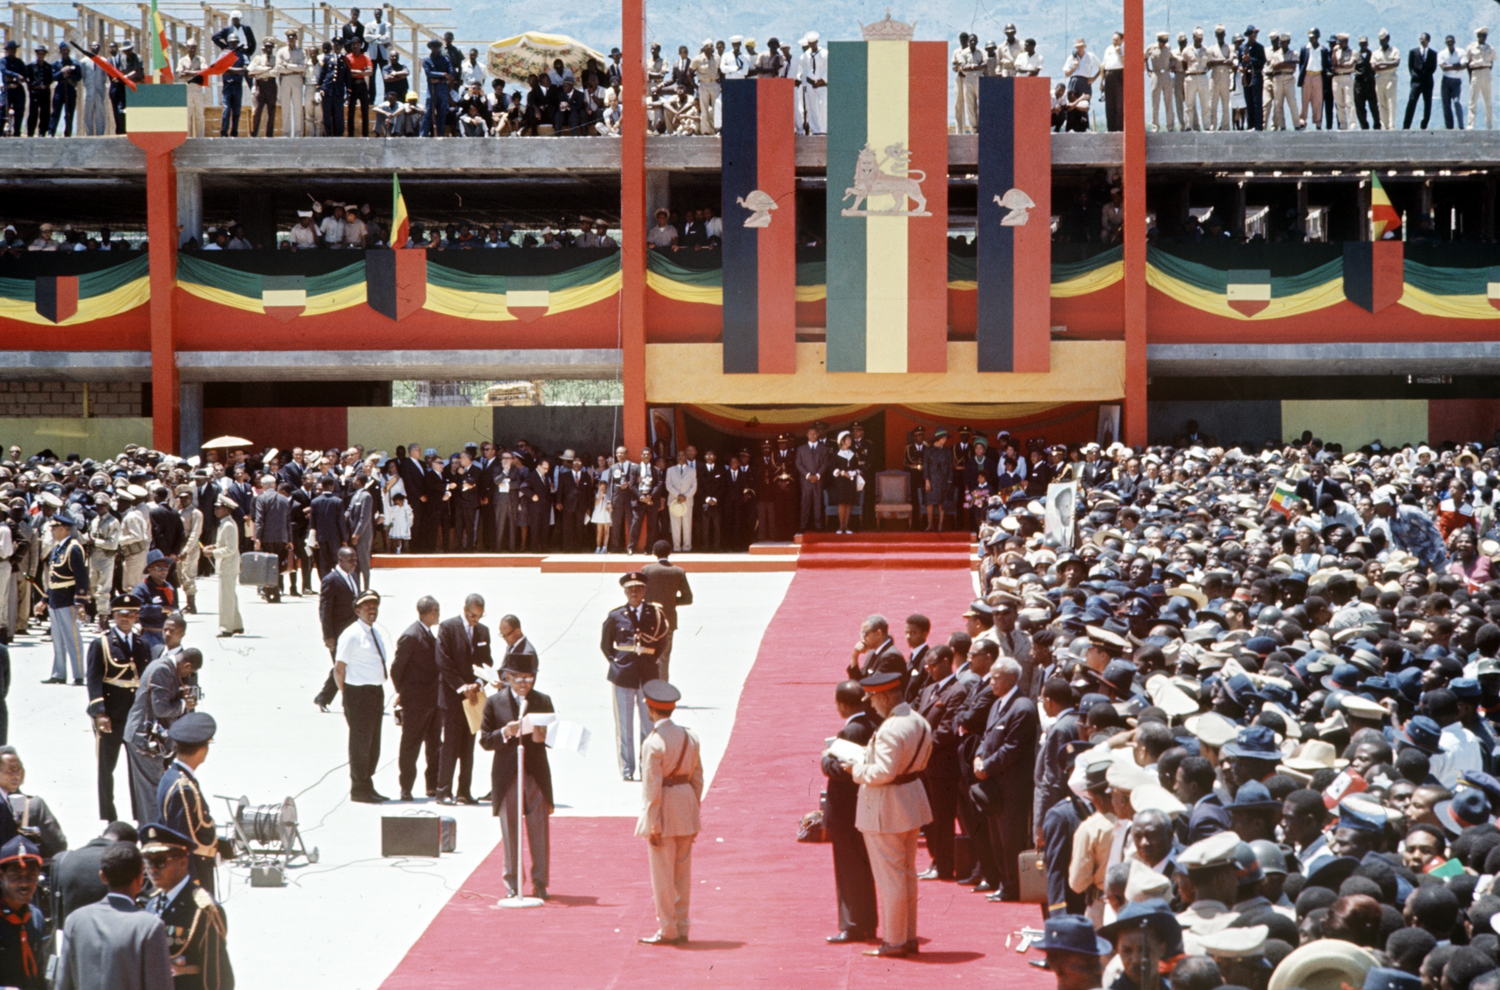 Haiti's "Papa Doc" Duvalier welcomes Emperor of Ethiopia Haile Selassie I to Port-au-Prince during Selassie's historic visit to the Caribbean, April 1966.